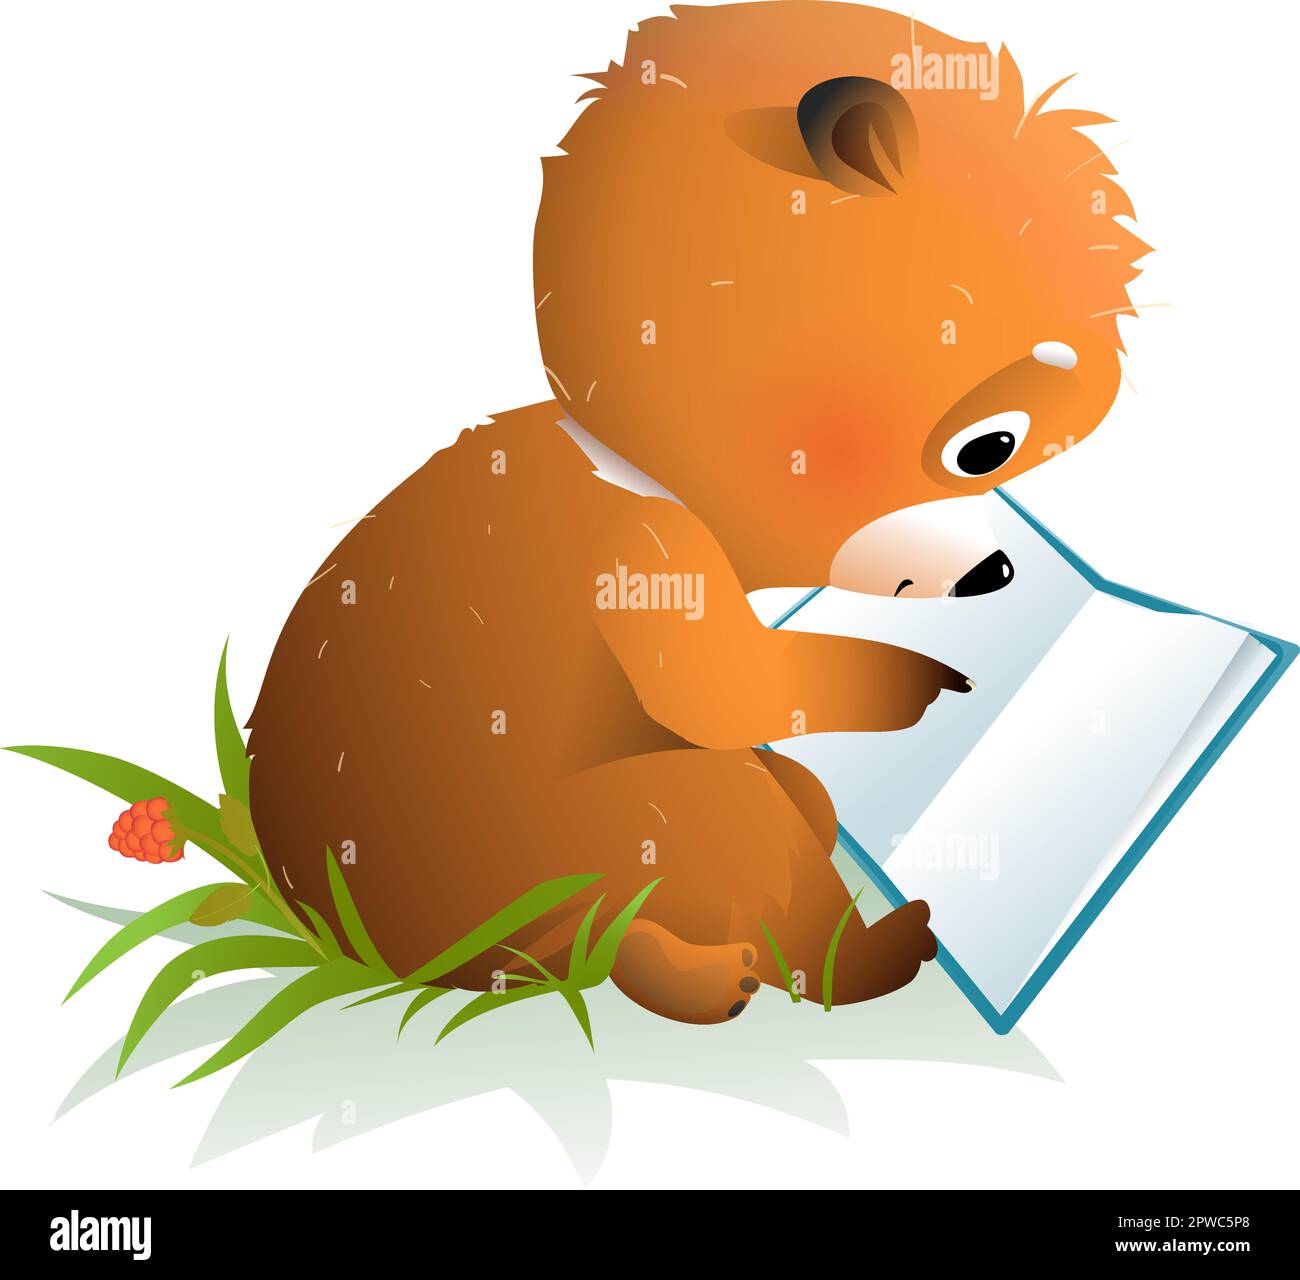 Teddy Bear Reading a Book or Learning in Forest Stock Vector